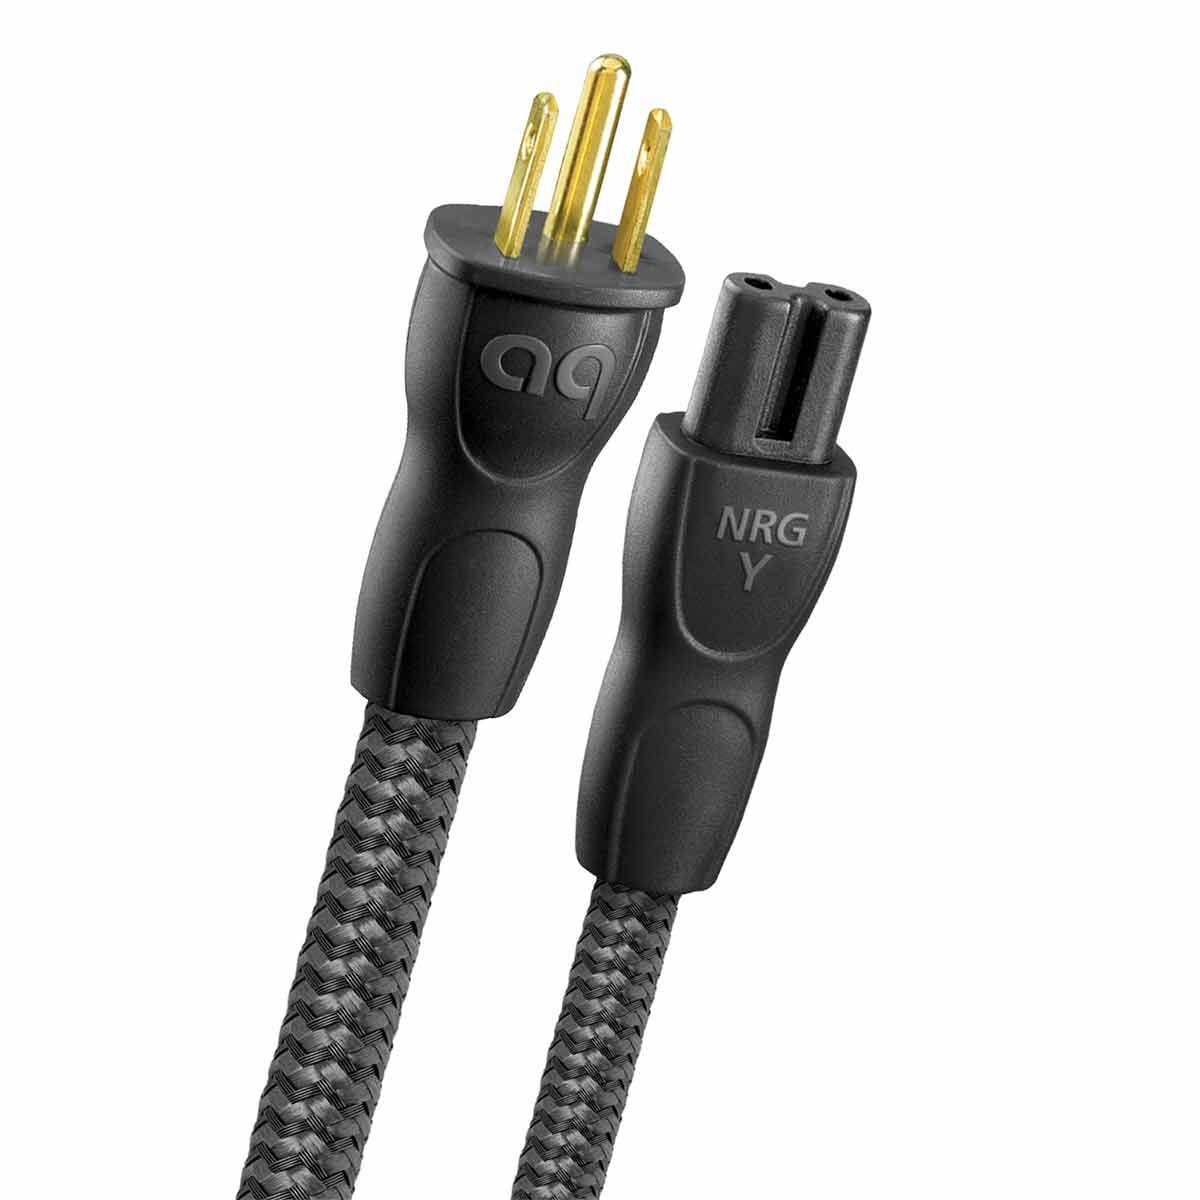 NRG-Y2 Cable, front